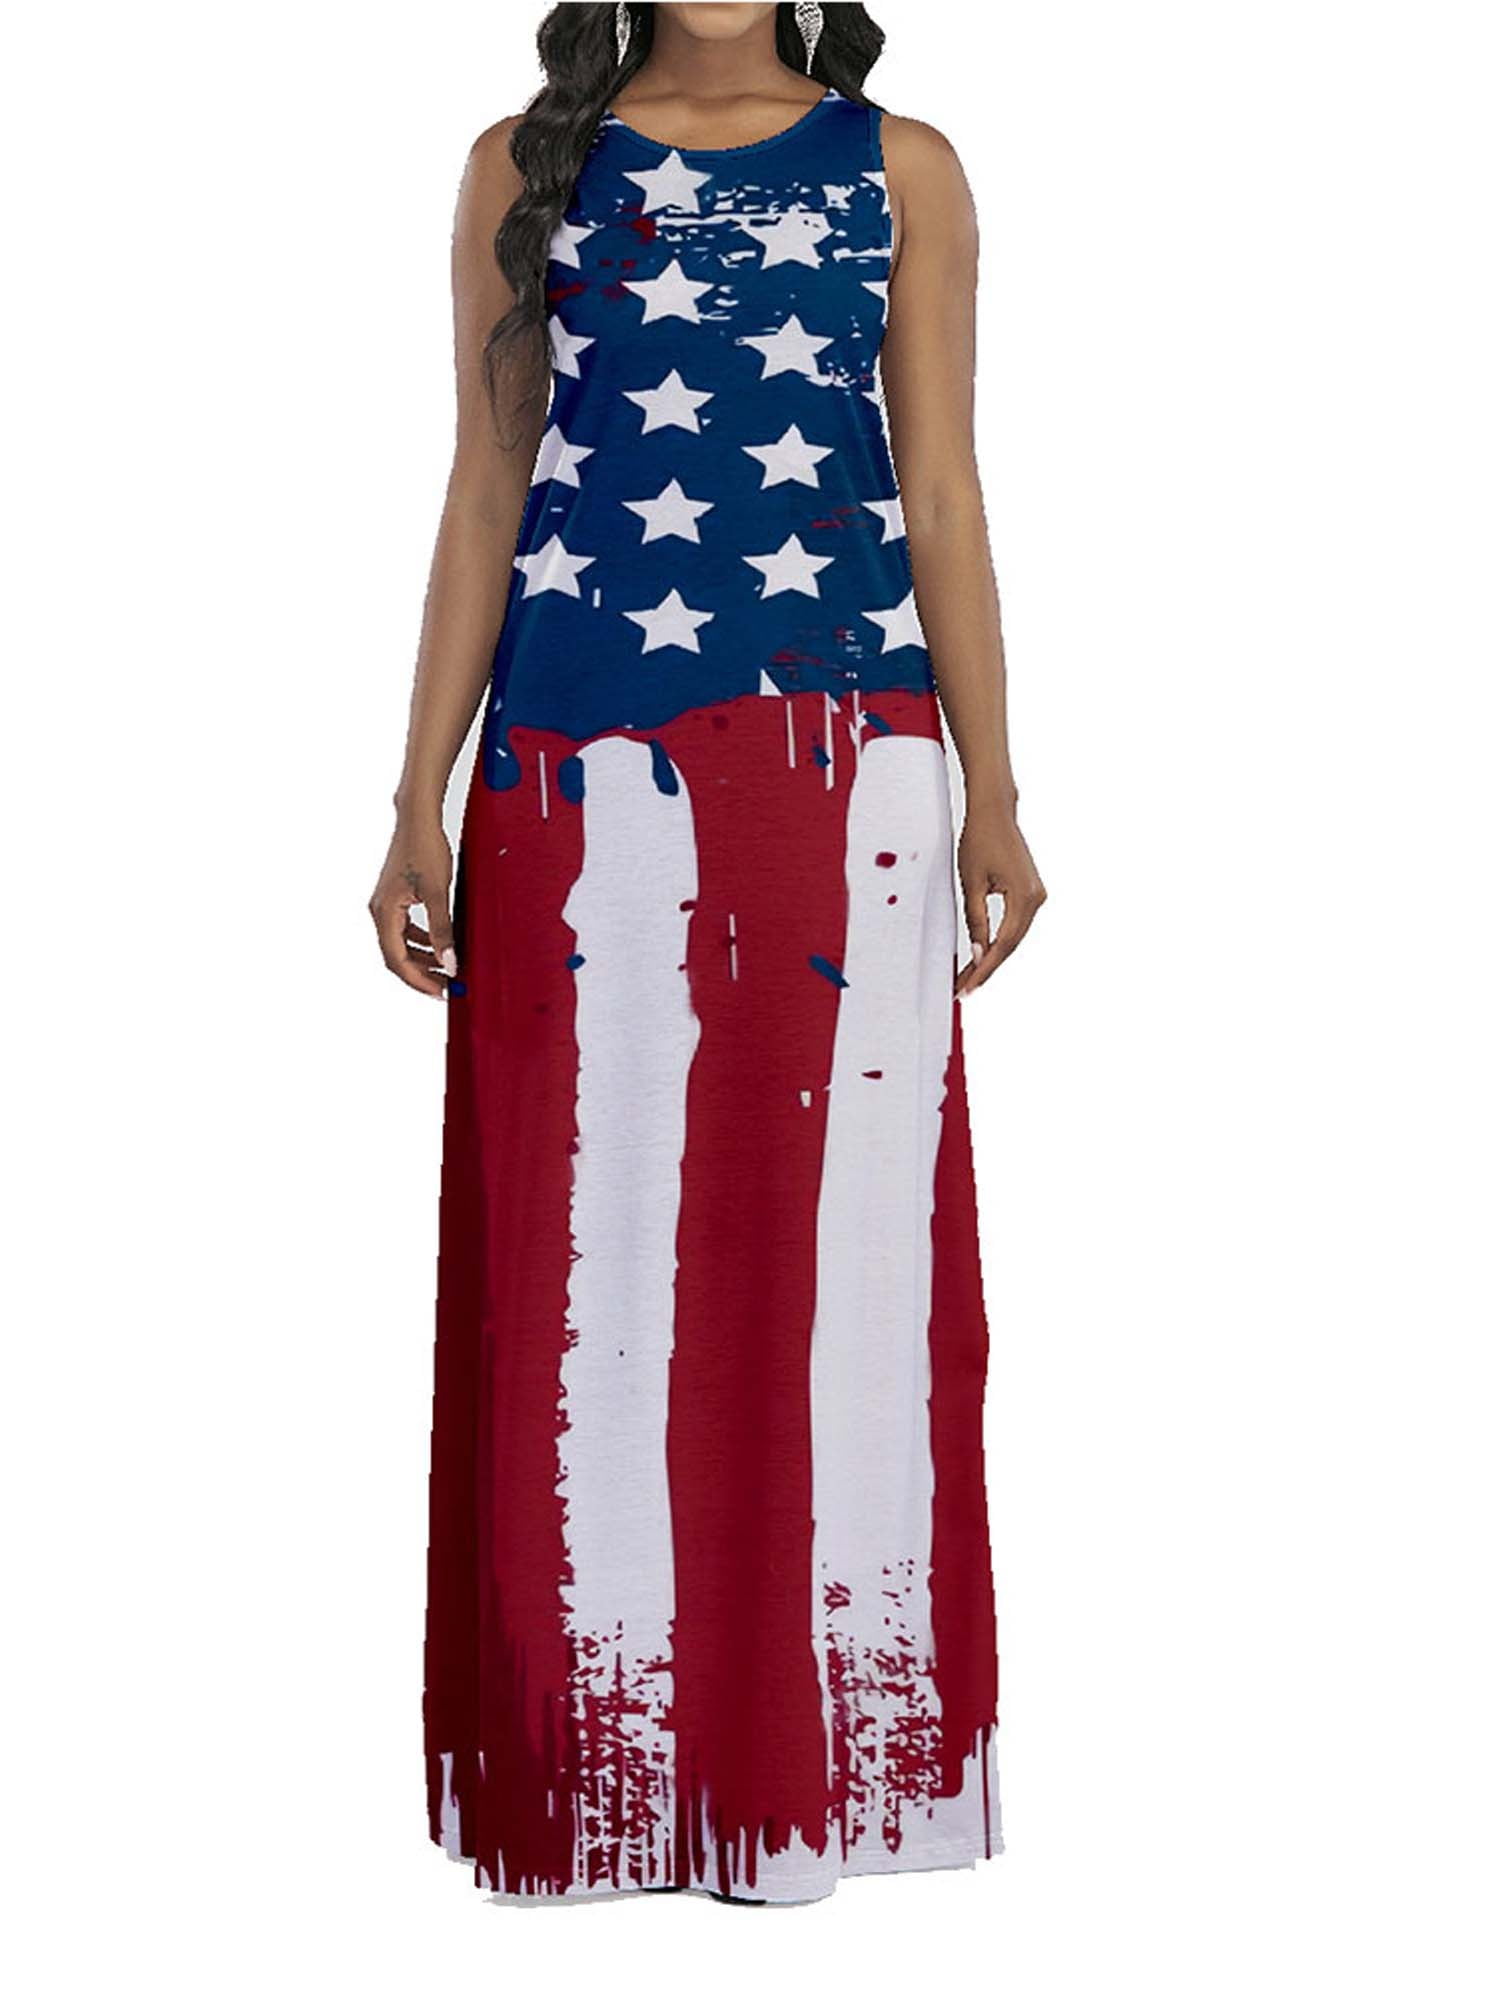 UPAIRC Womens Summer Independence Day Sundresses Casual 4th of July ...